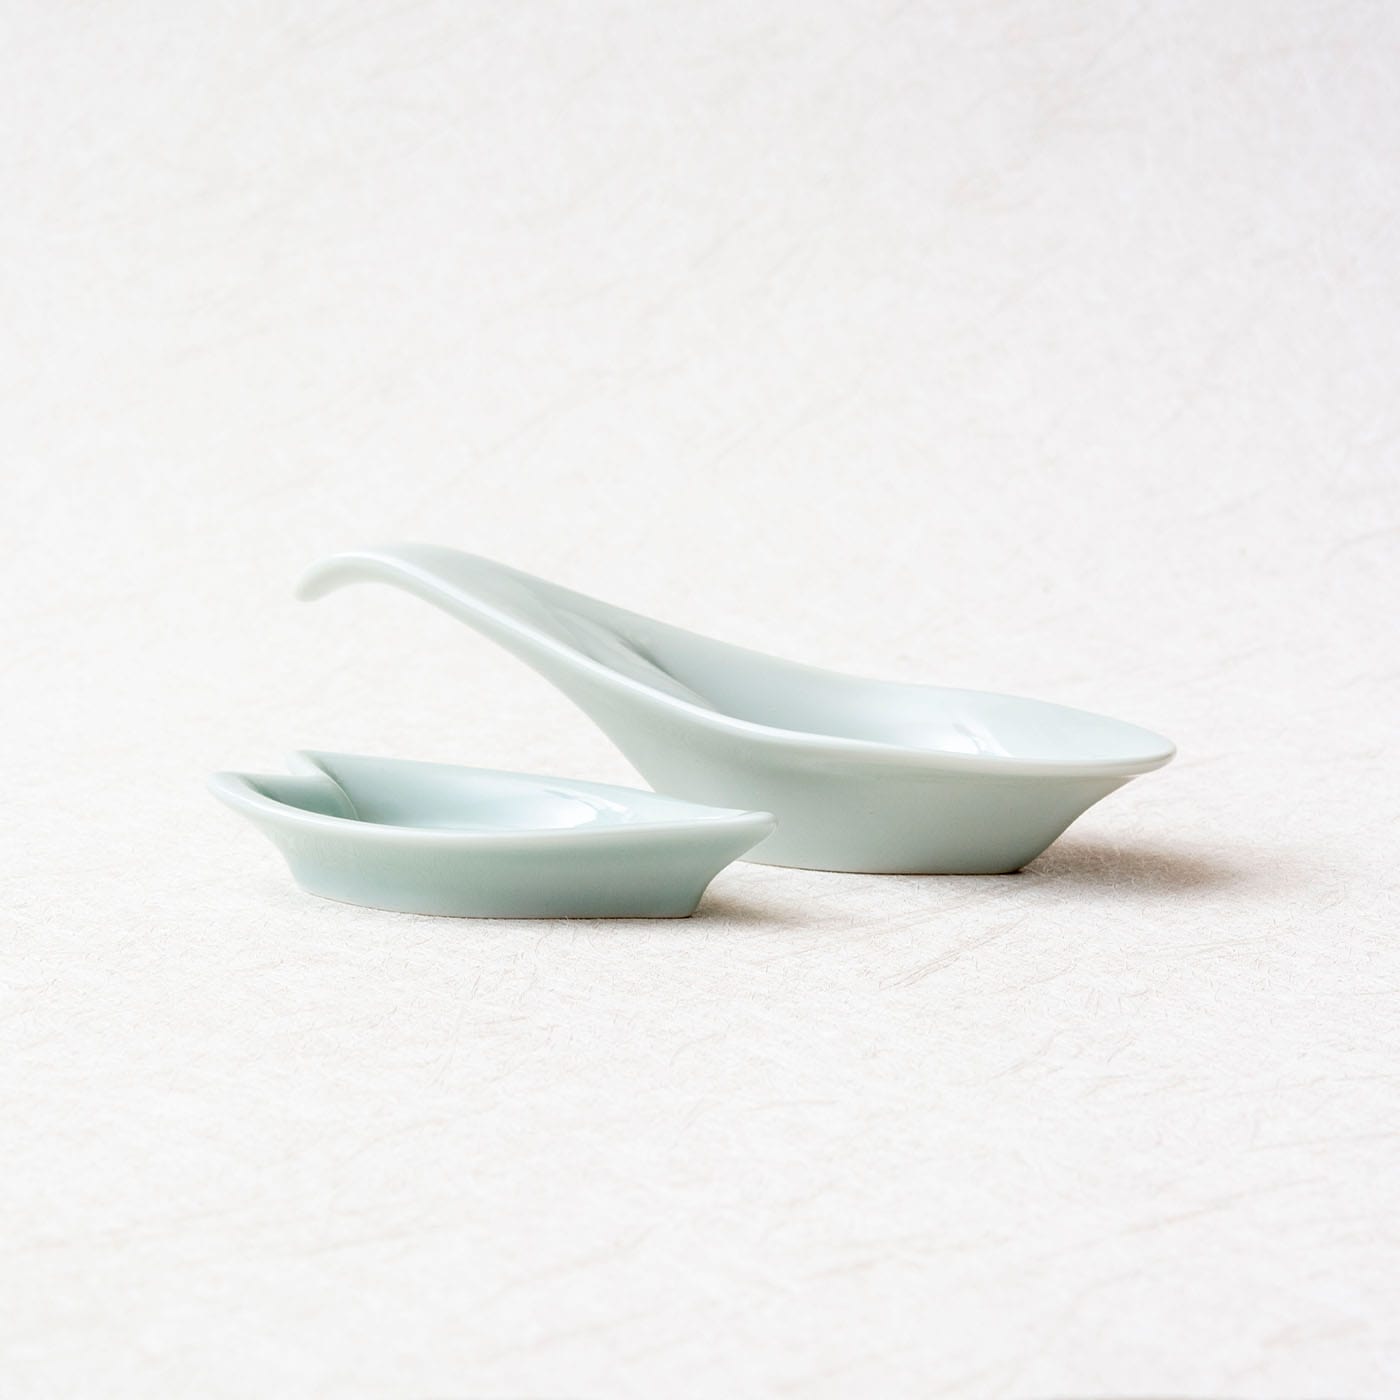 https://kutani-ware.jp/cdn/shop/products/kutani-ware-cherry-blossom-shaped-blue-ramen-spoon-with-spoon-rest-made-by-hiracle-542311_1800x1800.jpg?v=1685551807